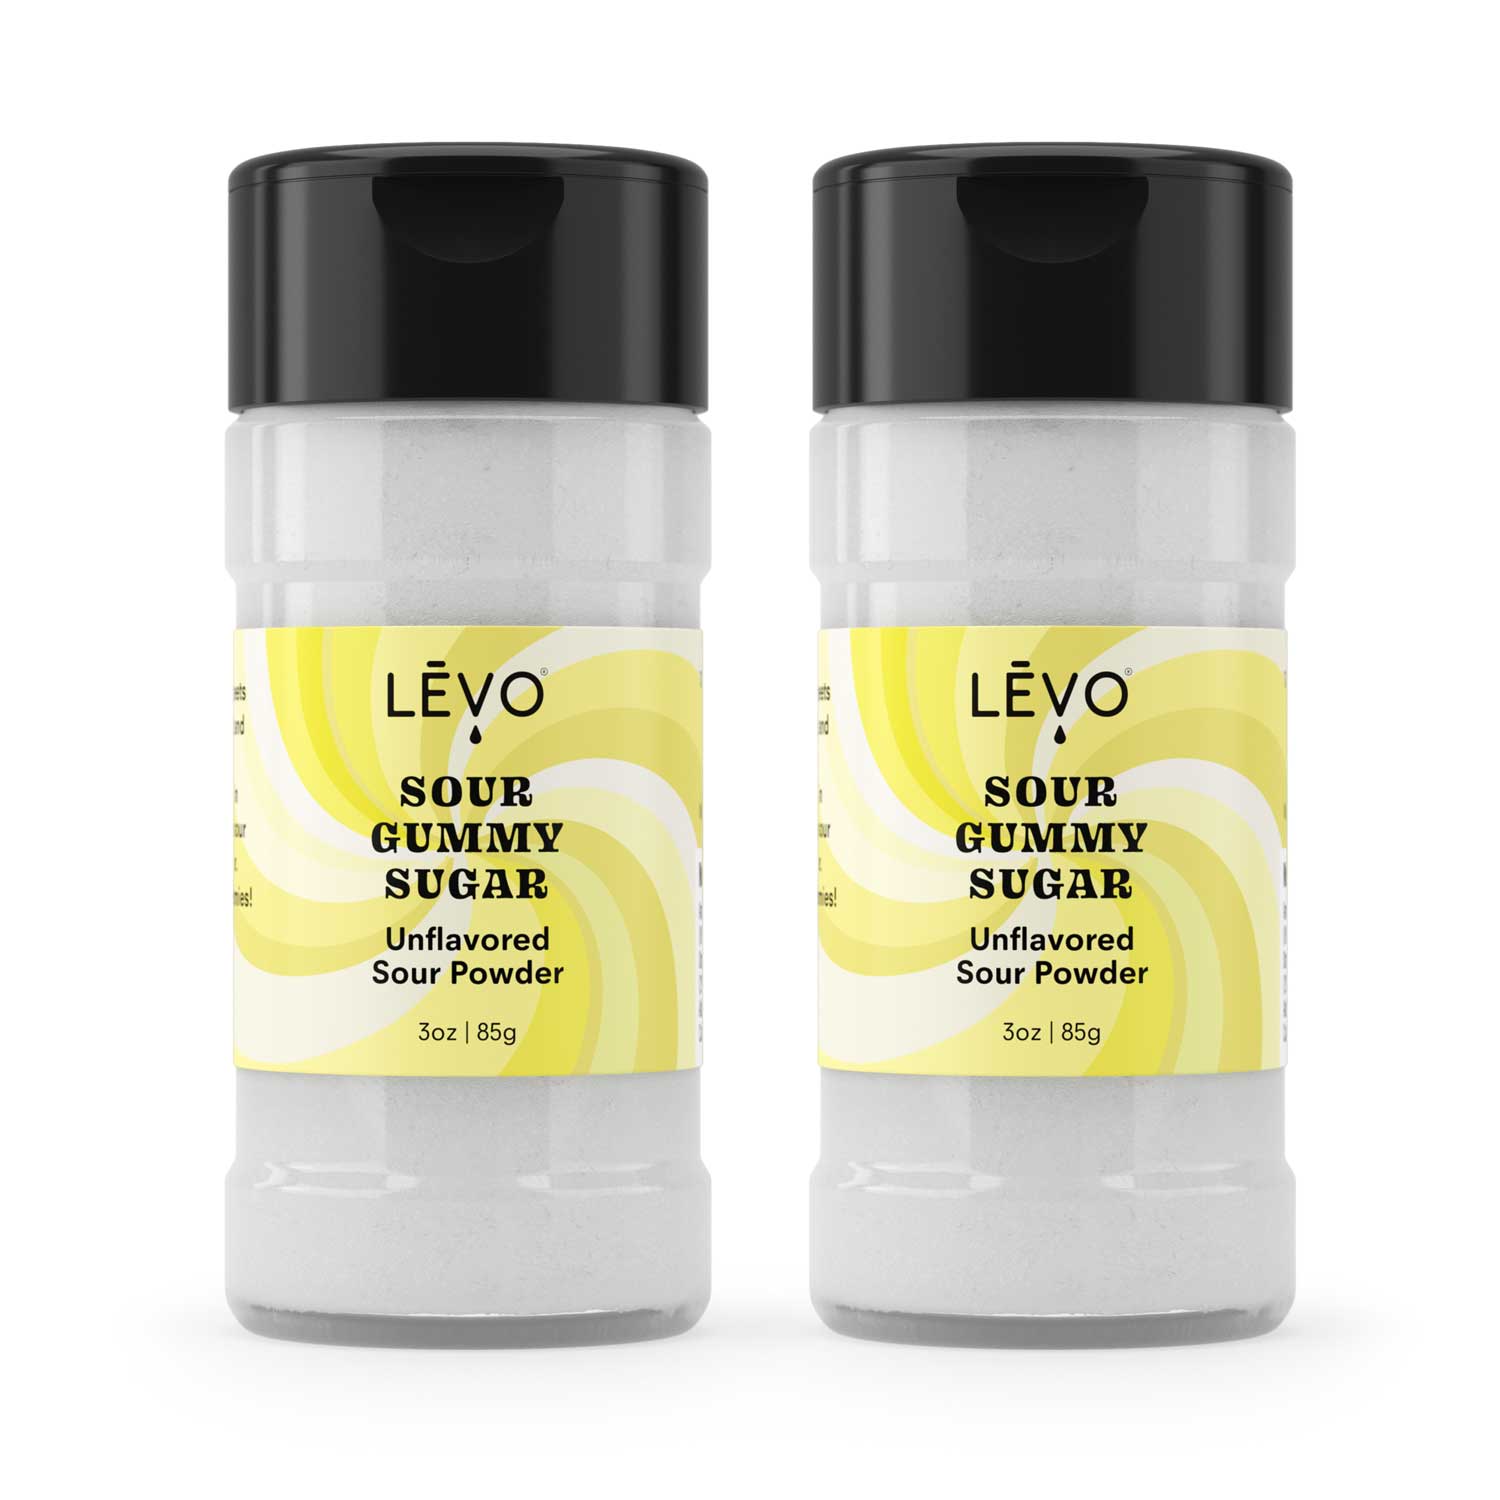 Sour gummy powder to dust on your LEVO infused gummies. Great for frosted desserts like cupcakes and cake pops, too.